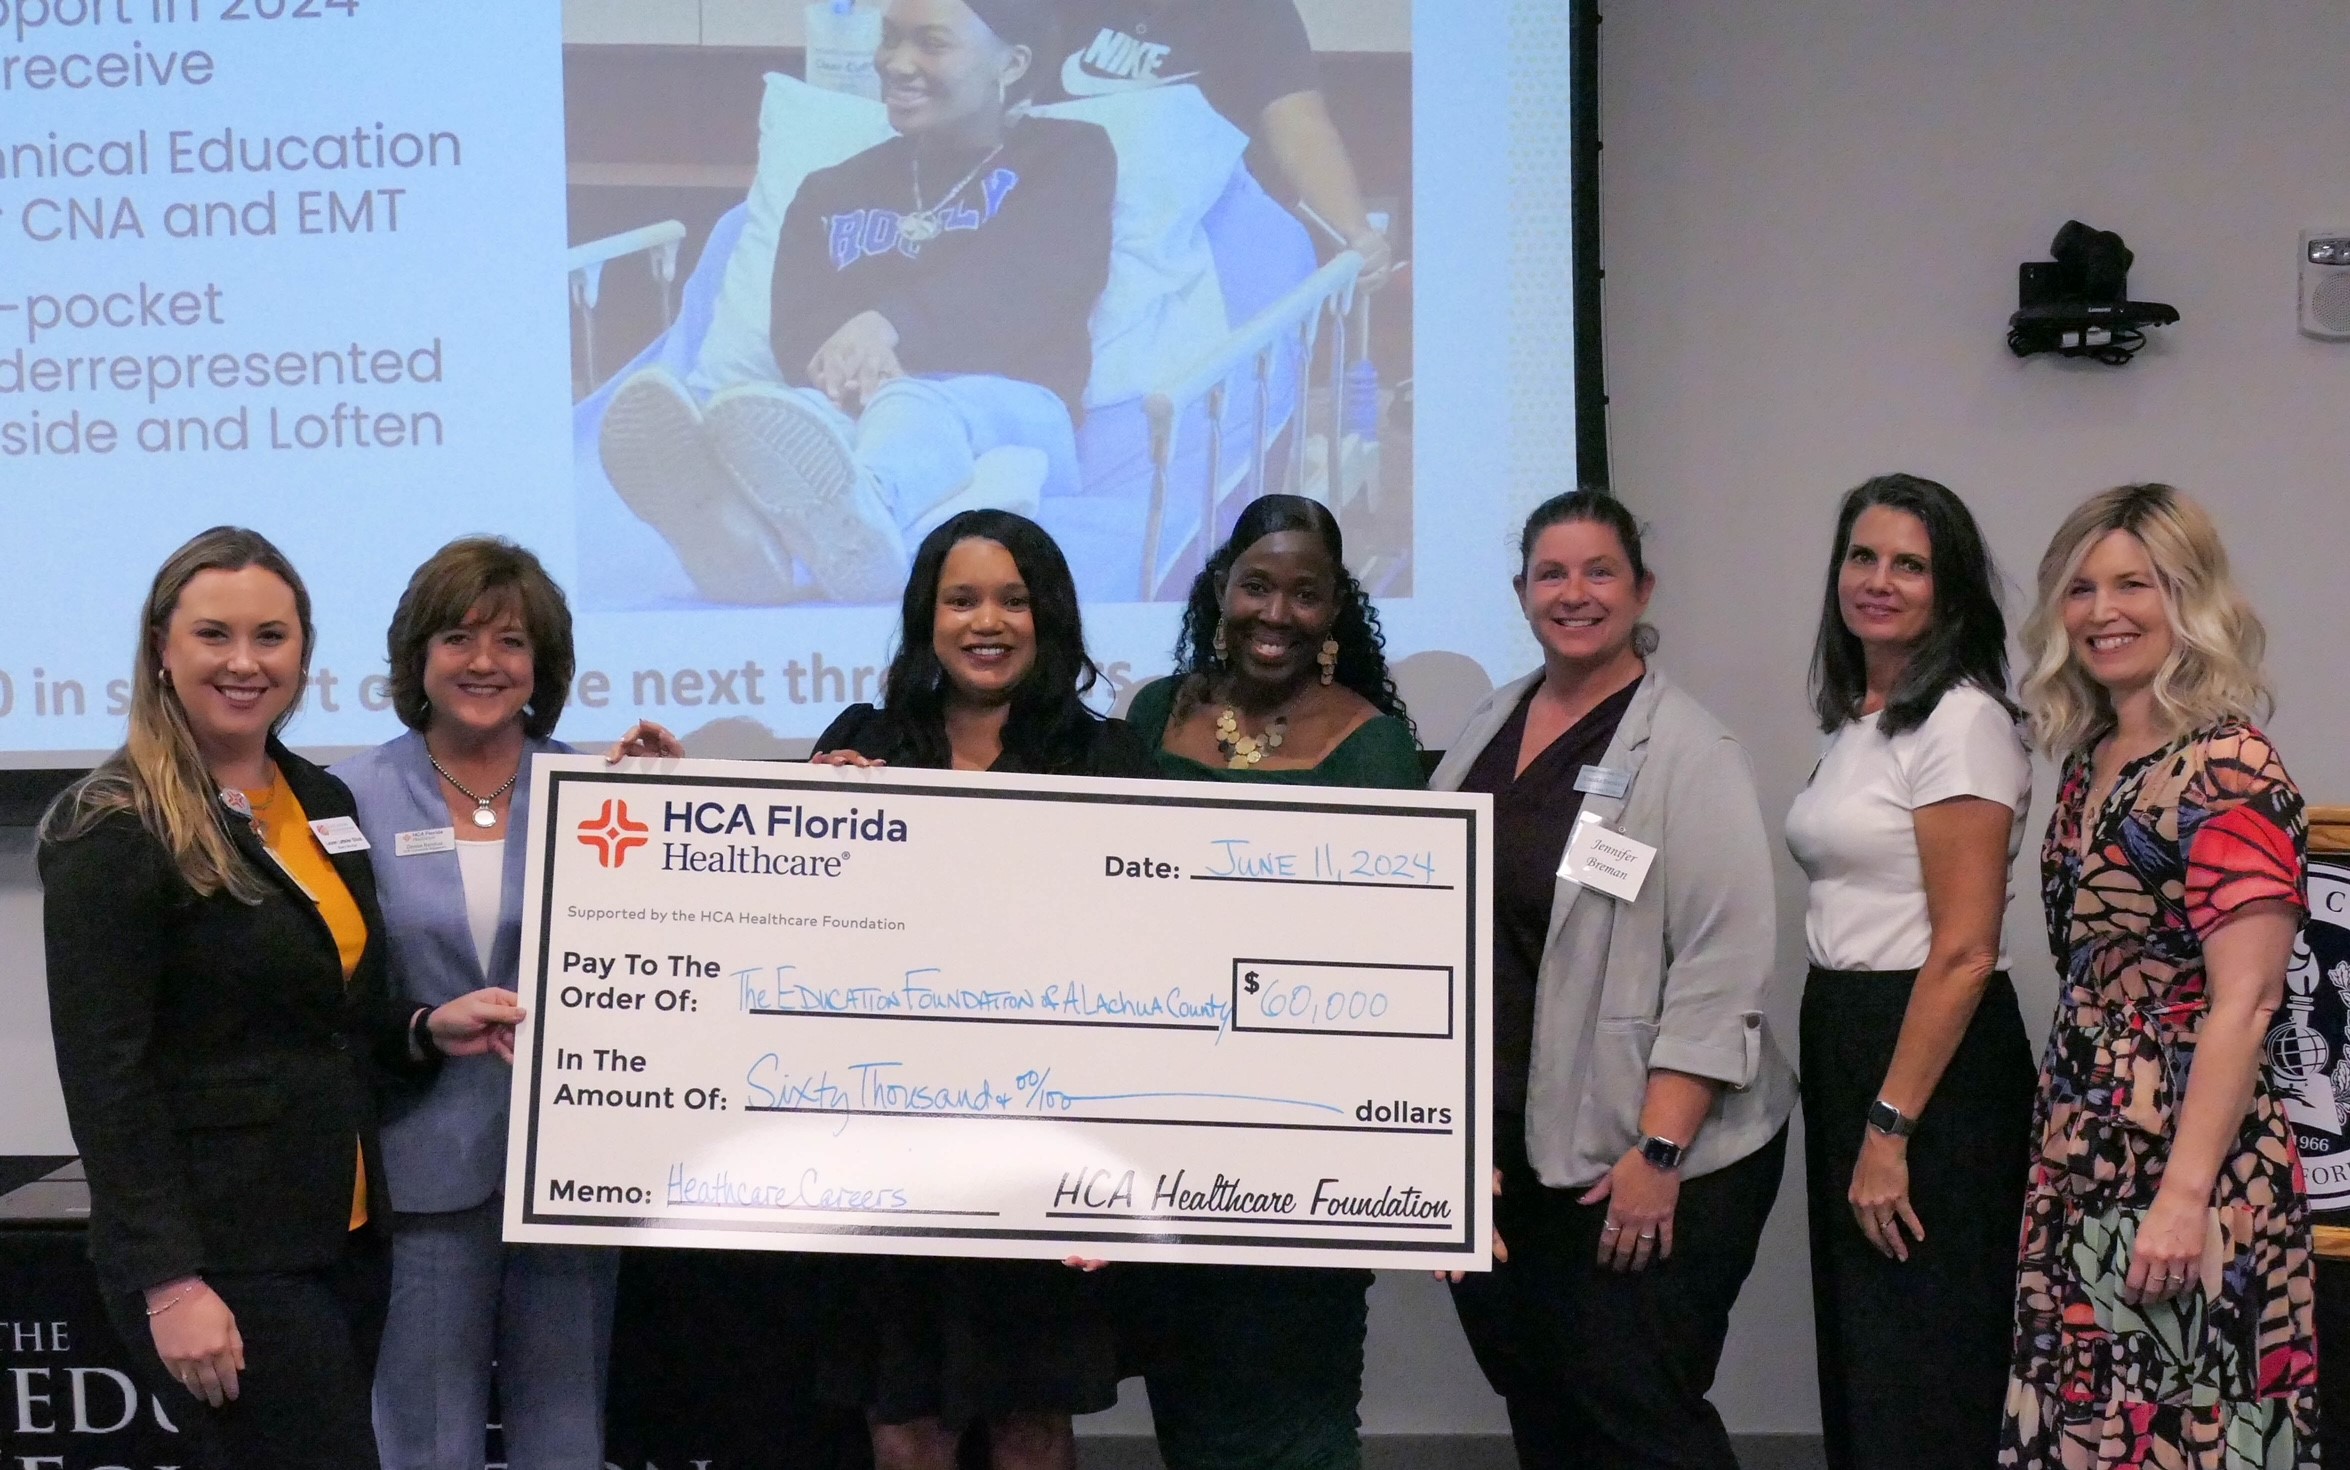 HCA Florida Healthcare colleagues presenting the Education Foundation for a check for $60,000 to use over the next three years to fund healthcare career opportunities.